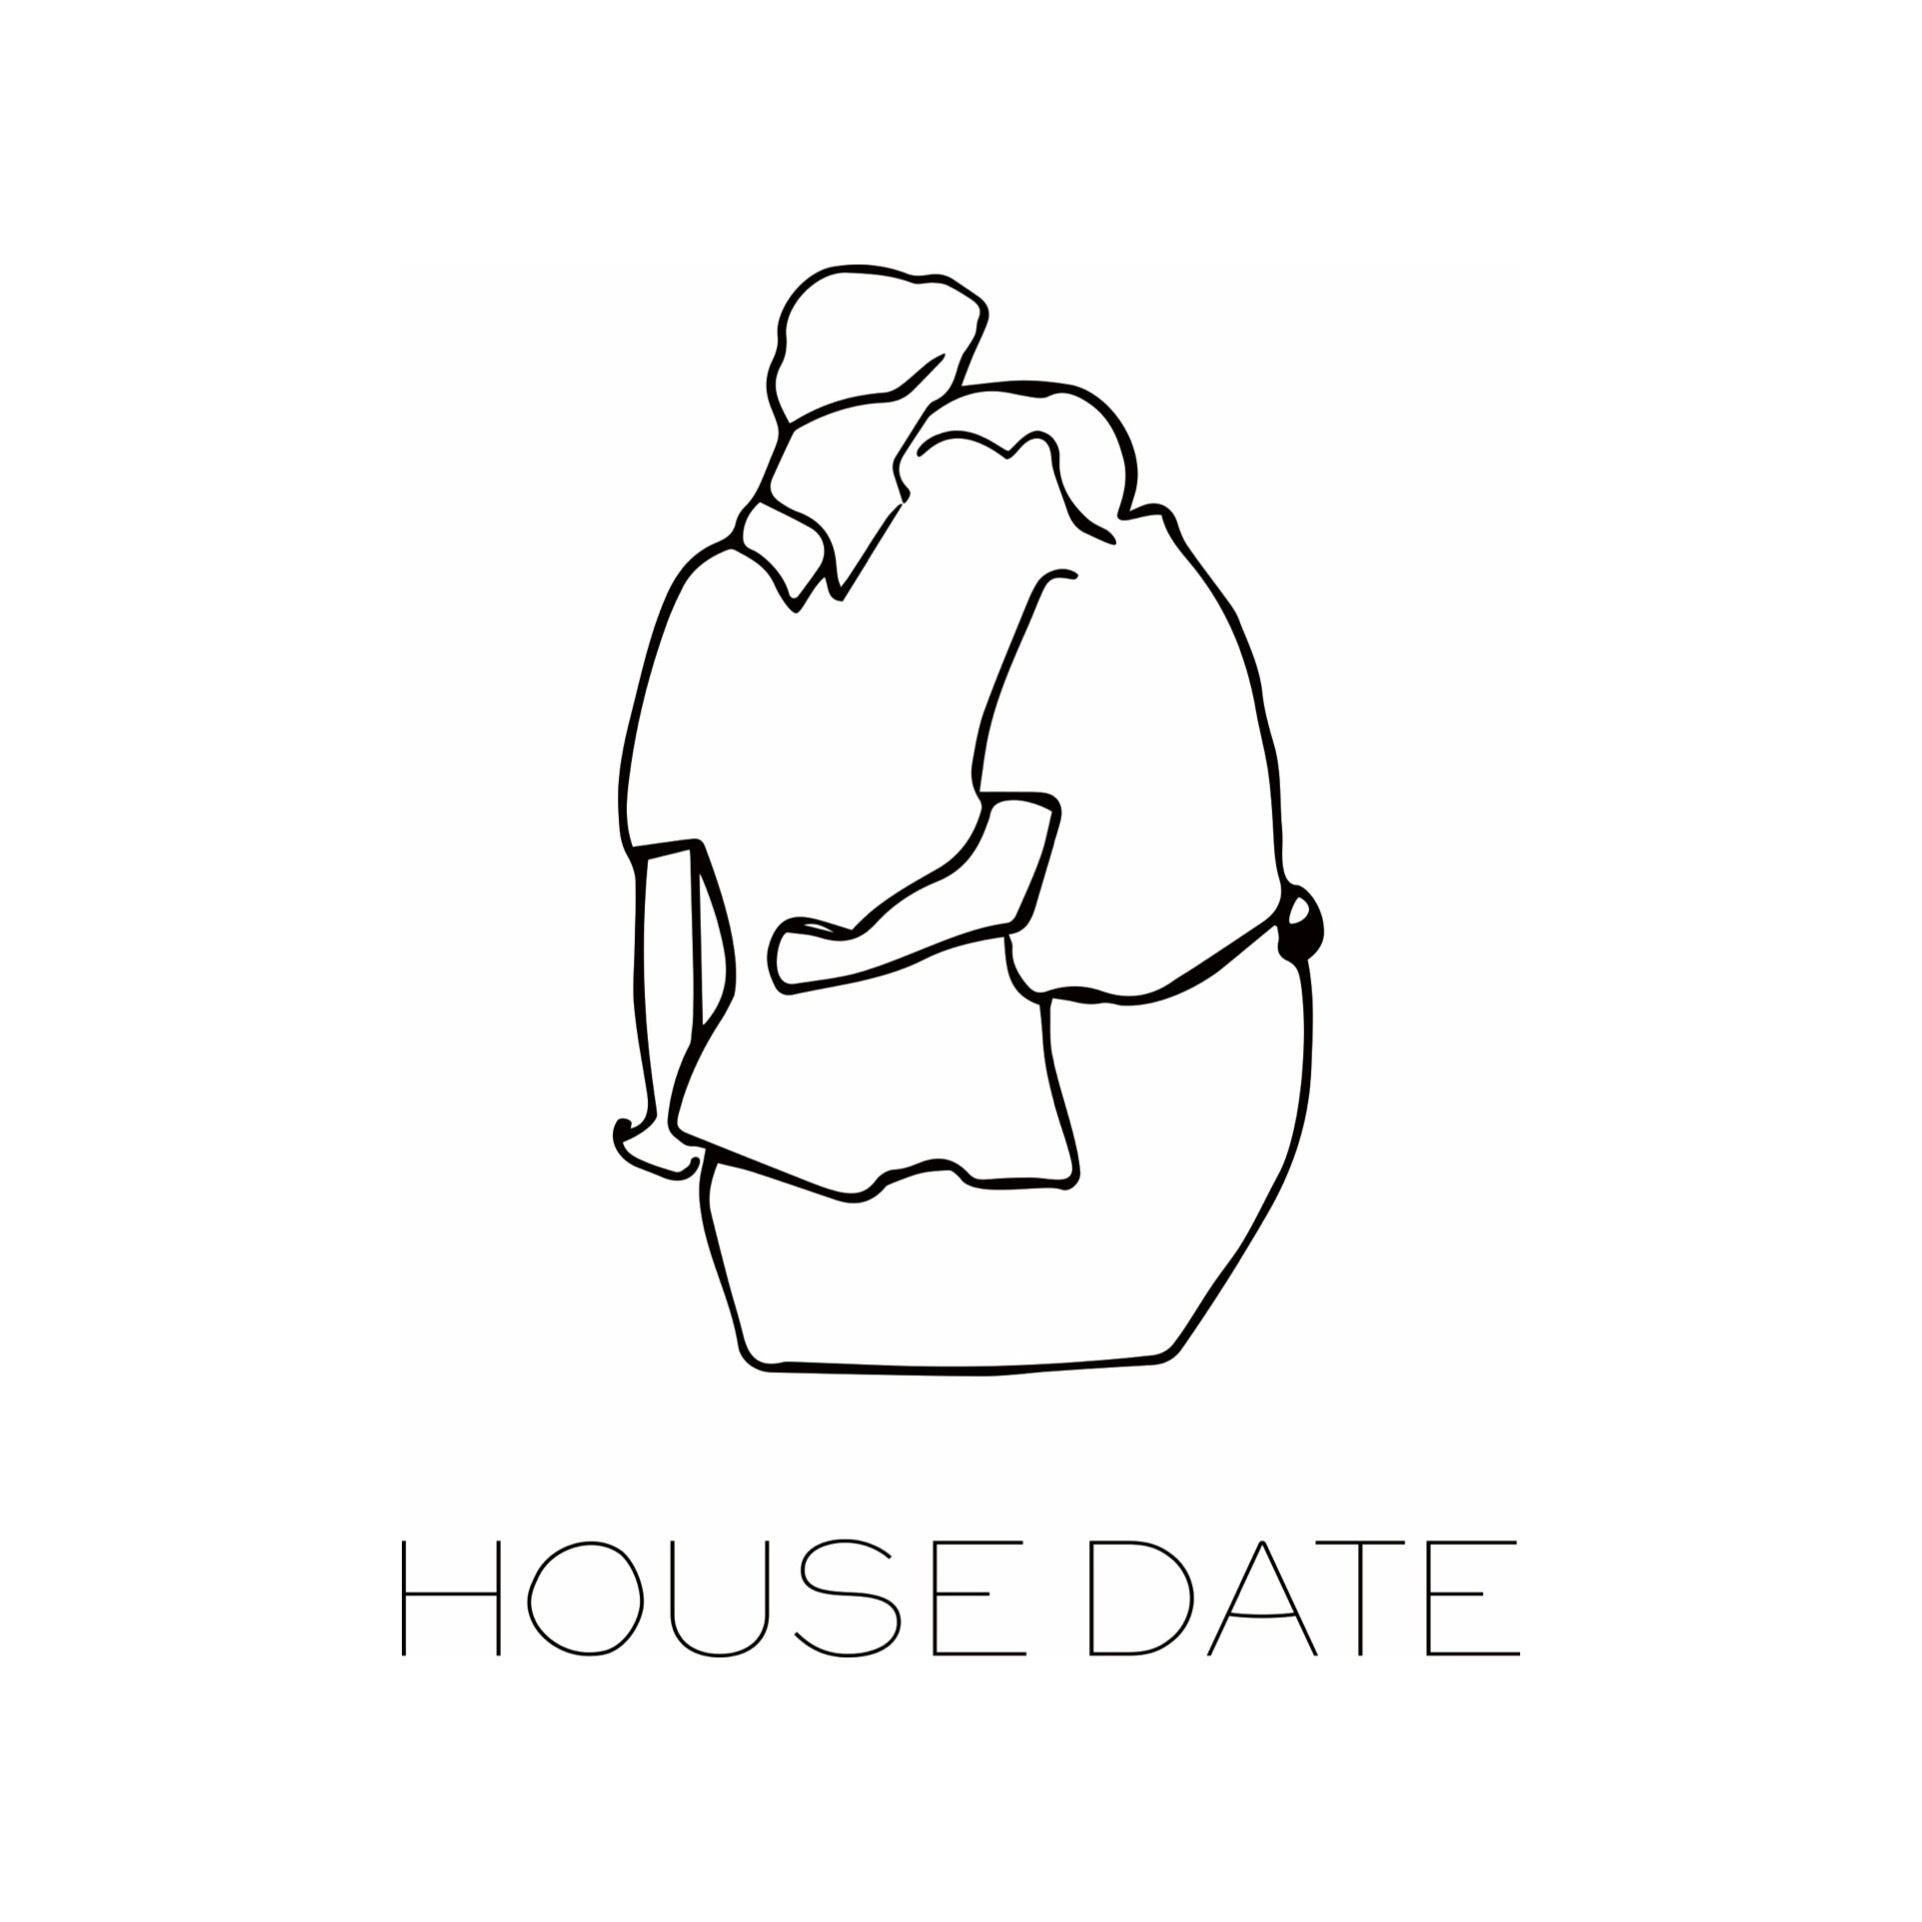 HOUSE DATE